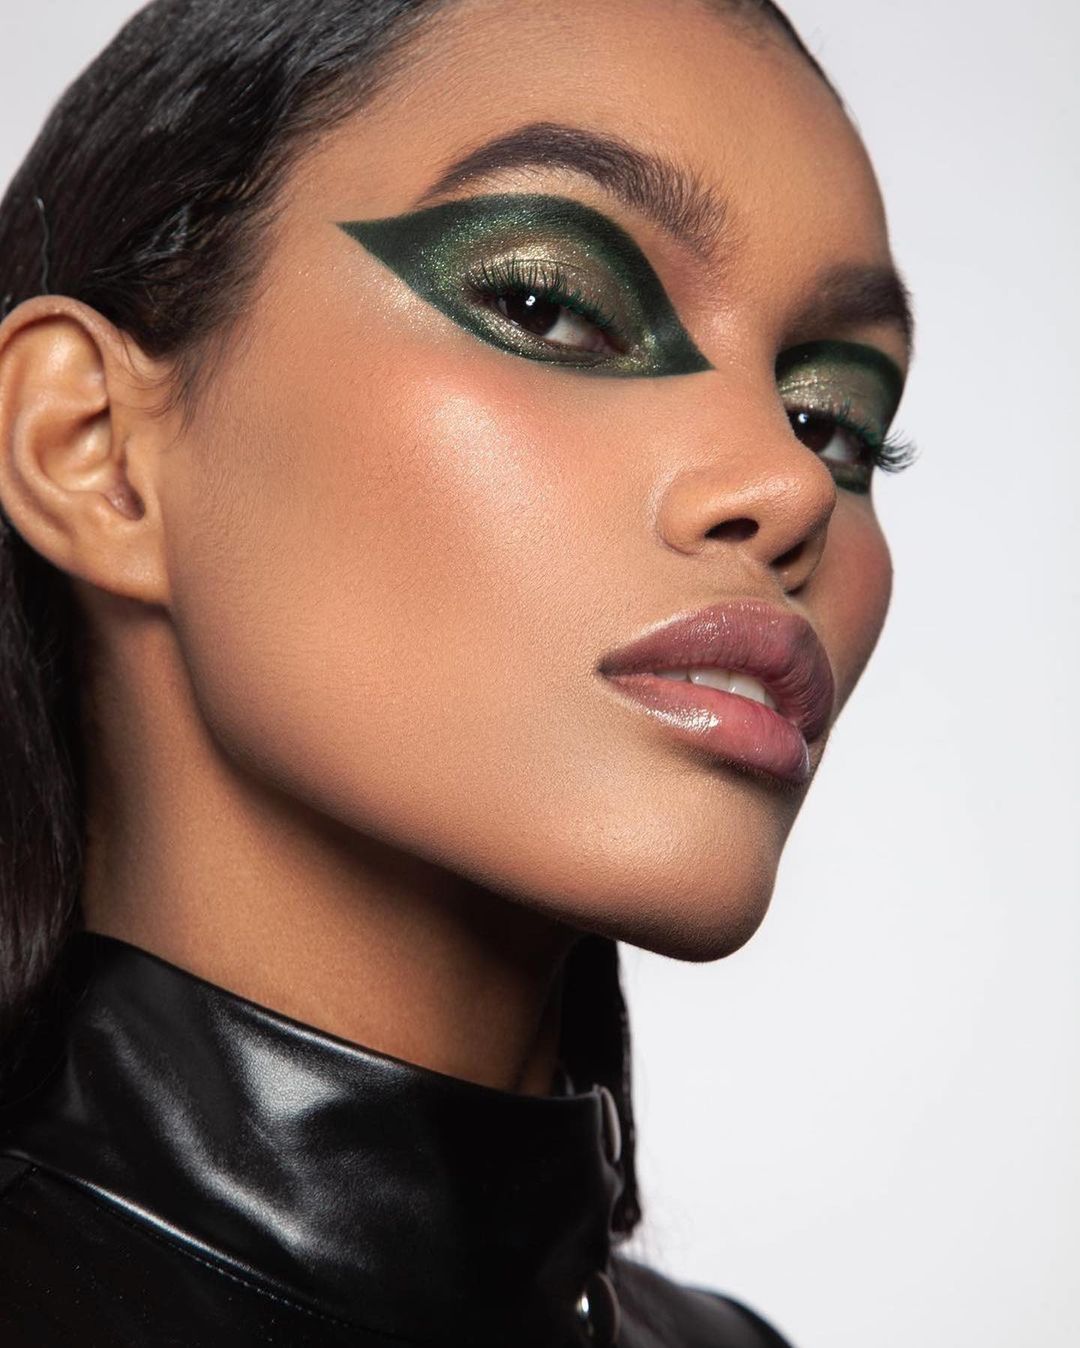 SHISEIDO: File under: eyes that mesmerize. Recreate this look by ...